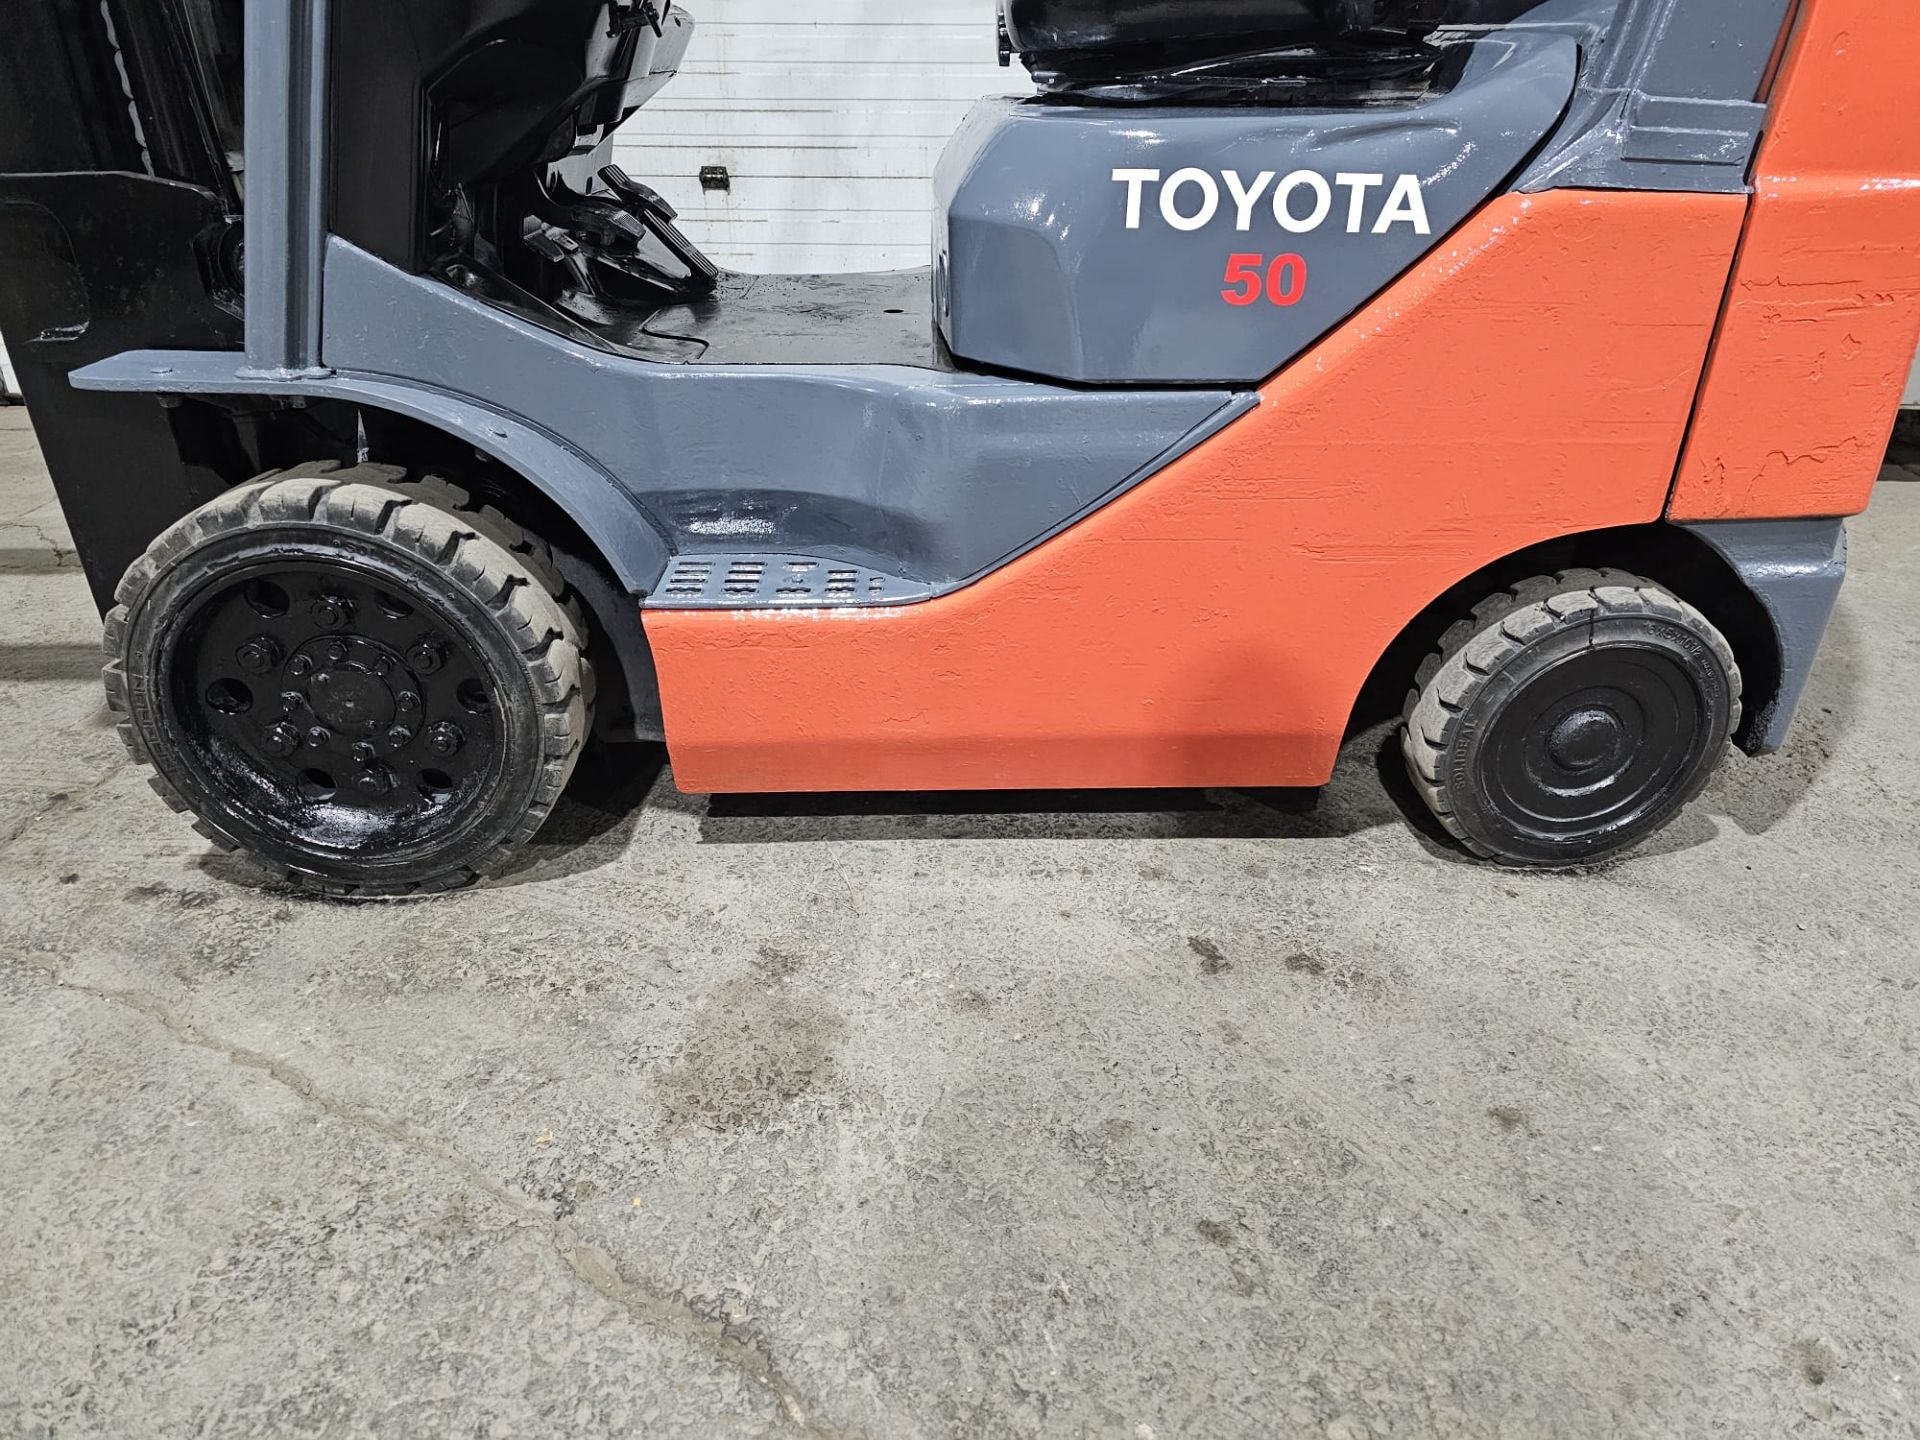 2018 TOYOTA 5,000lbs Capacity LPG (Propane) Forklift 4-STAGE with sideshift - Image 3 of 7